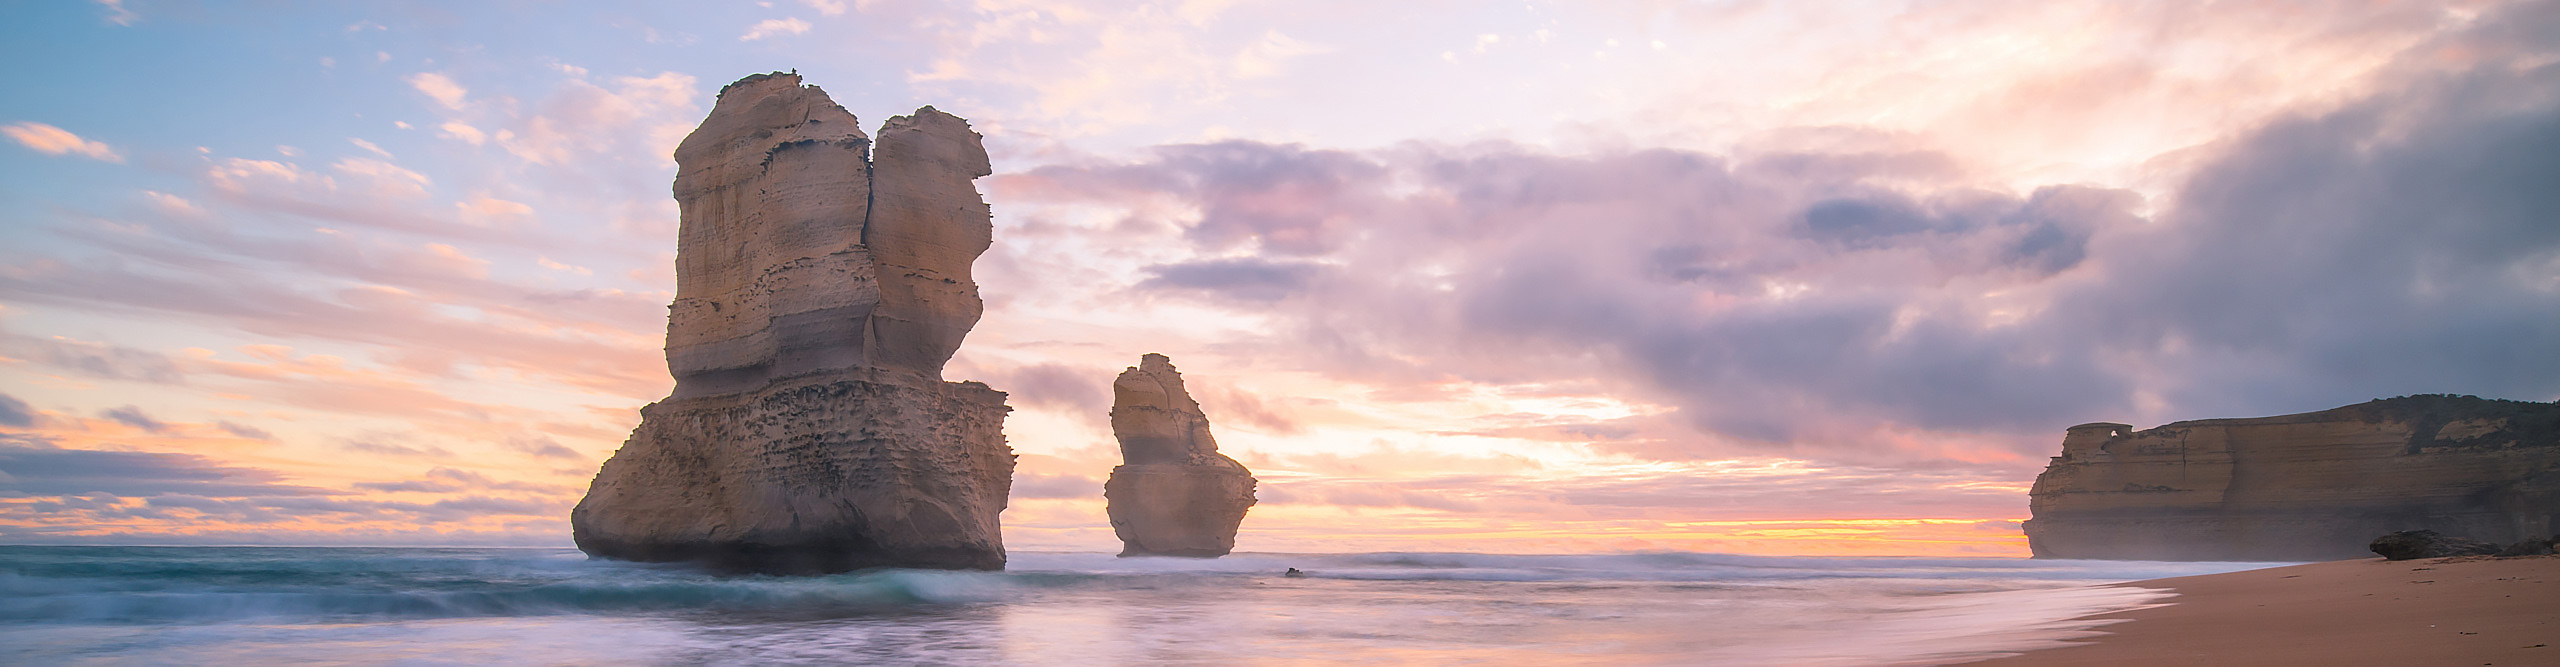 Gibson steps, Twelve Apostles at sunset with pink and blue clouds, the great ocean road, Australia.